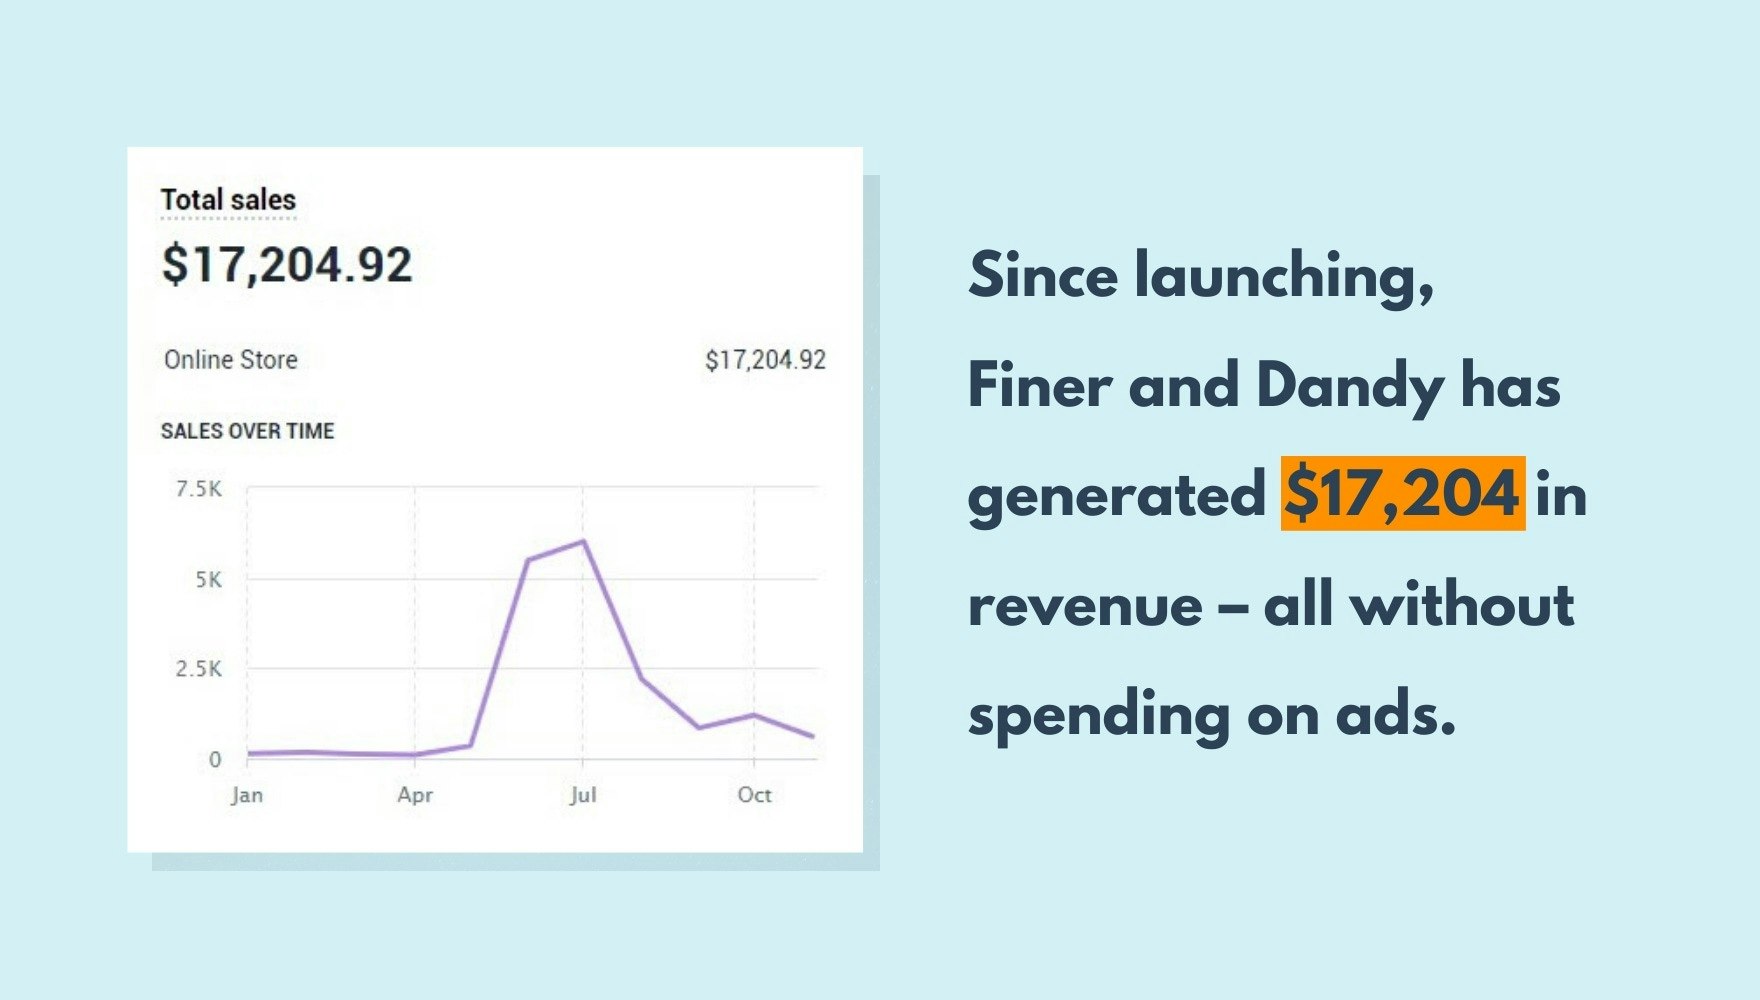 A screeshot shows Finer and Dandy's sales revenue to date after building a brand